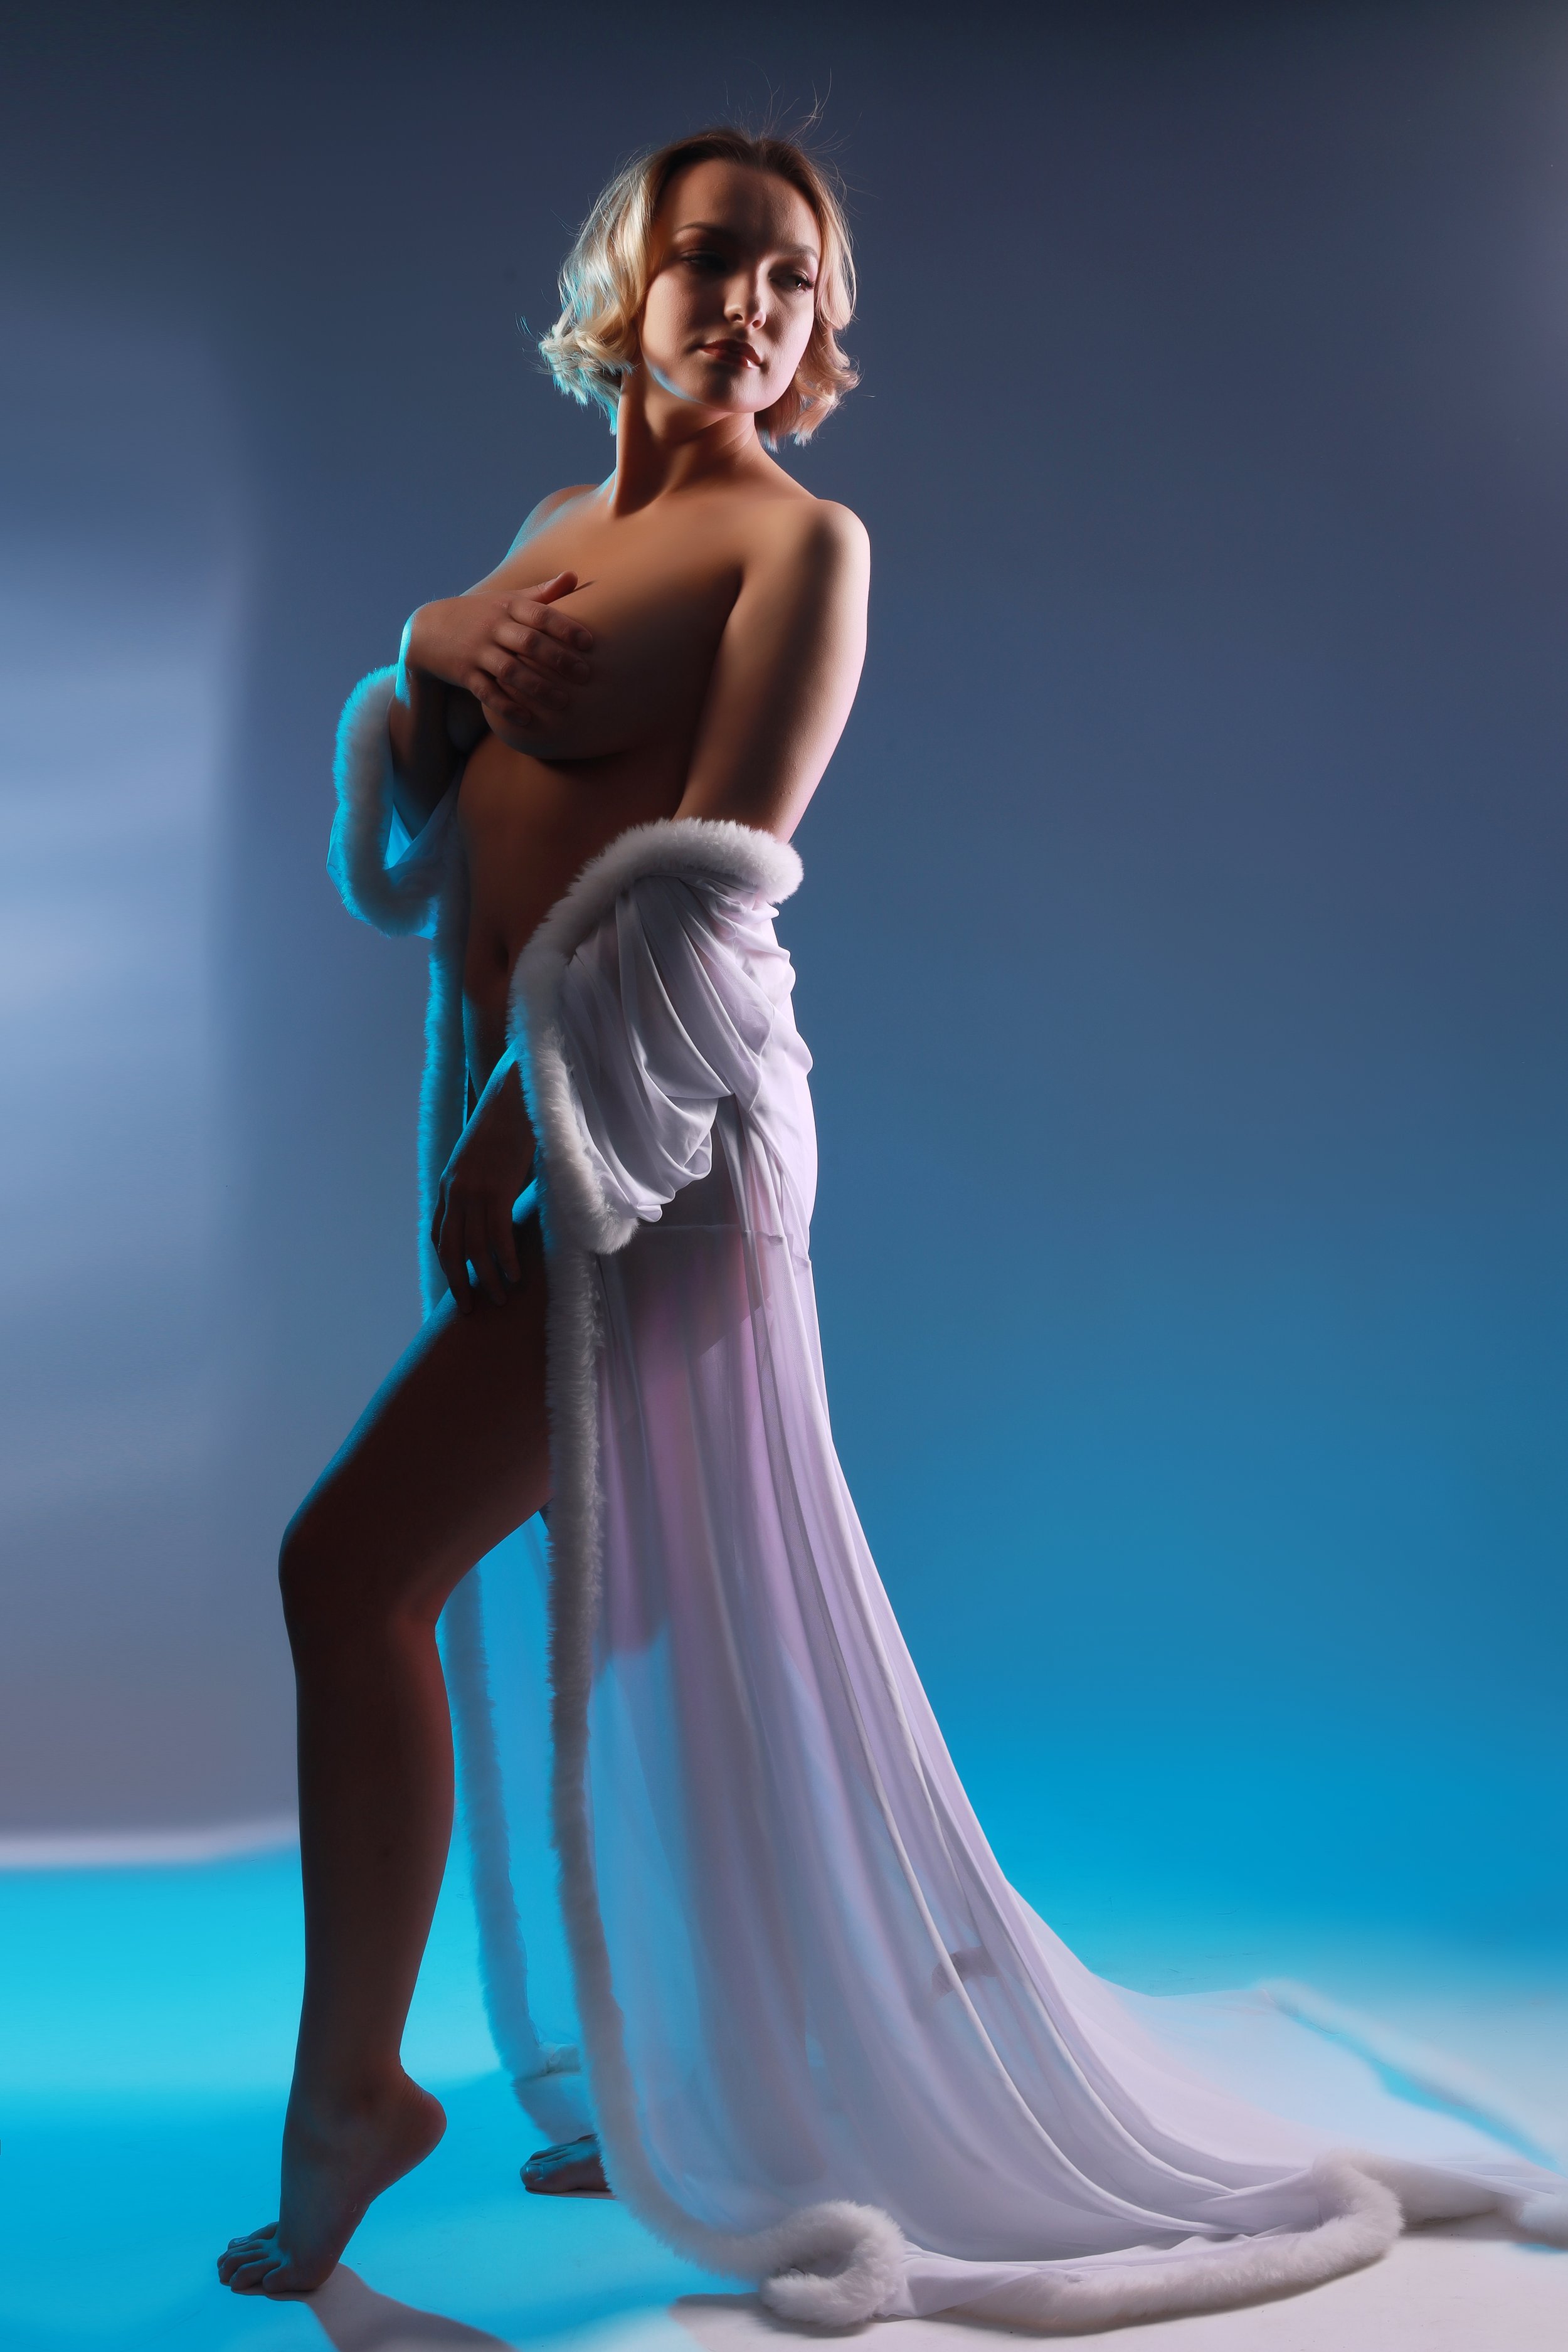 beautiful neon nude photoshoot at curves photography studios manchester.jpg